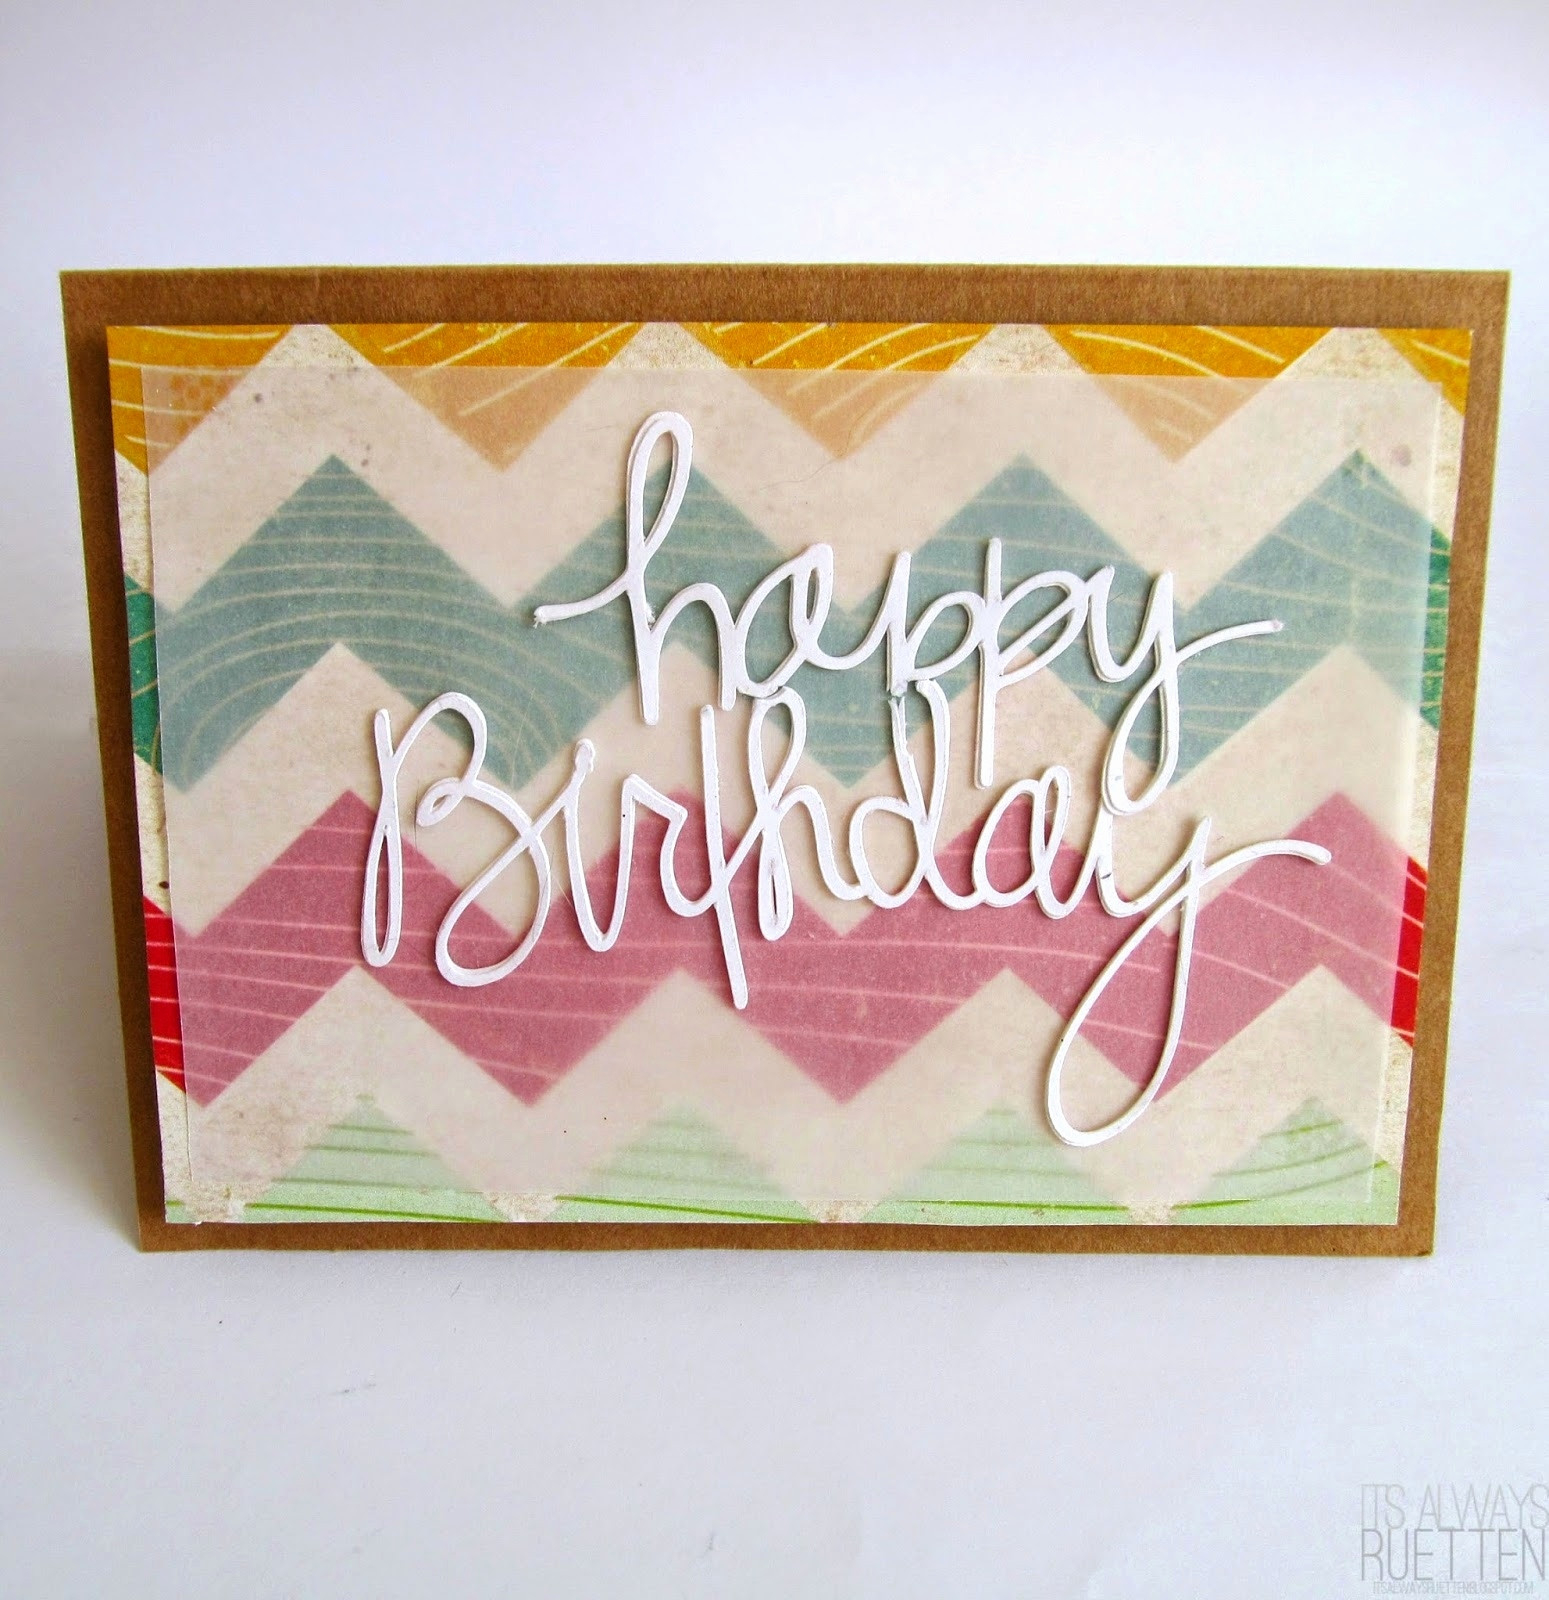 Creative Birthday Card Ideas For Friends Best Birthday Card 12 Awesome Handmade Birthday Card Ideas For Best